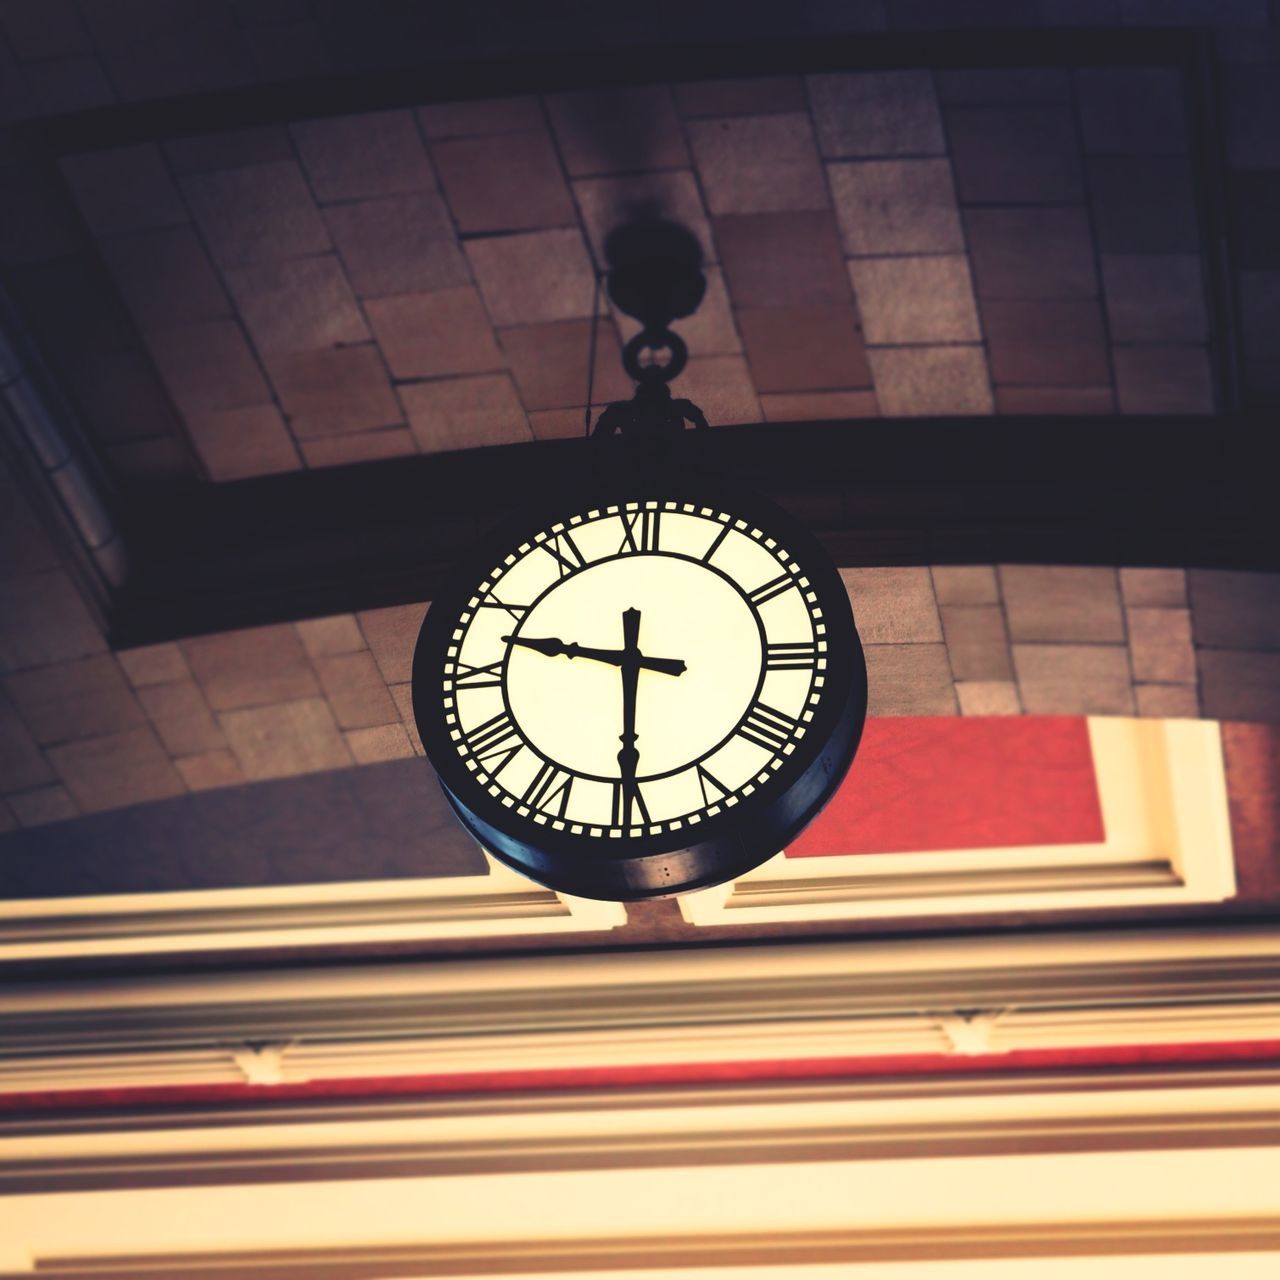 clock, time, indoors, low angle view, architecture, built structure, circle, clock face, ceiling, roman numeral, directly below, hanging, geometric shape, number, clock tower, minute hand, religion, no people, wall - building feature, lighting equipment